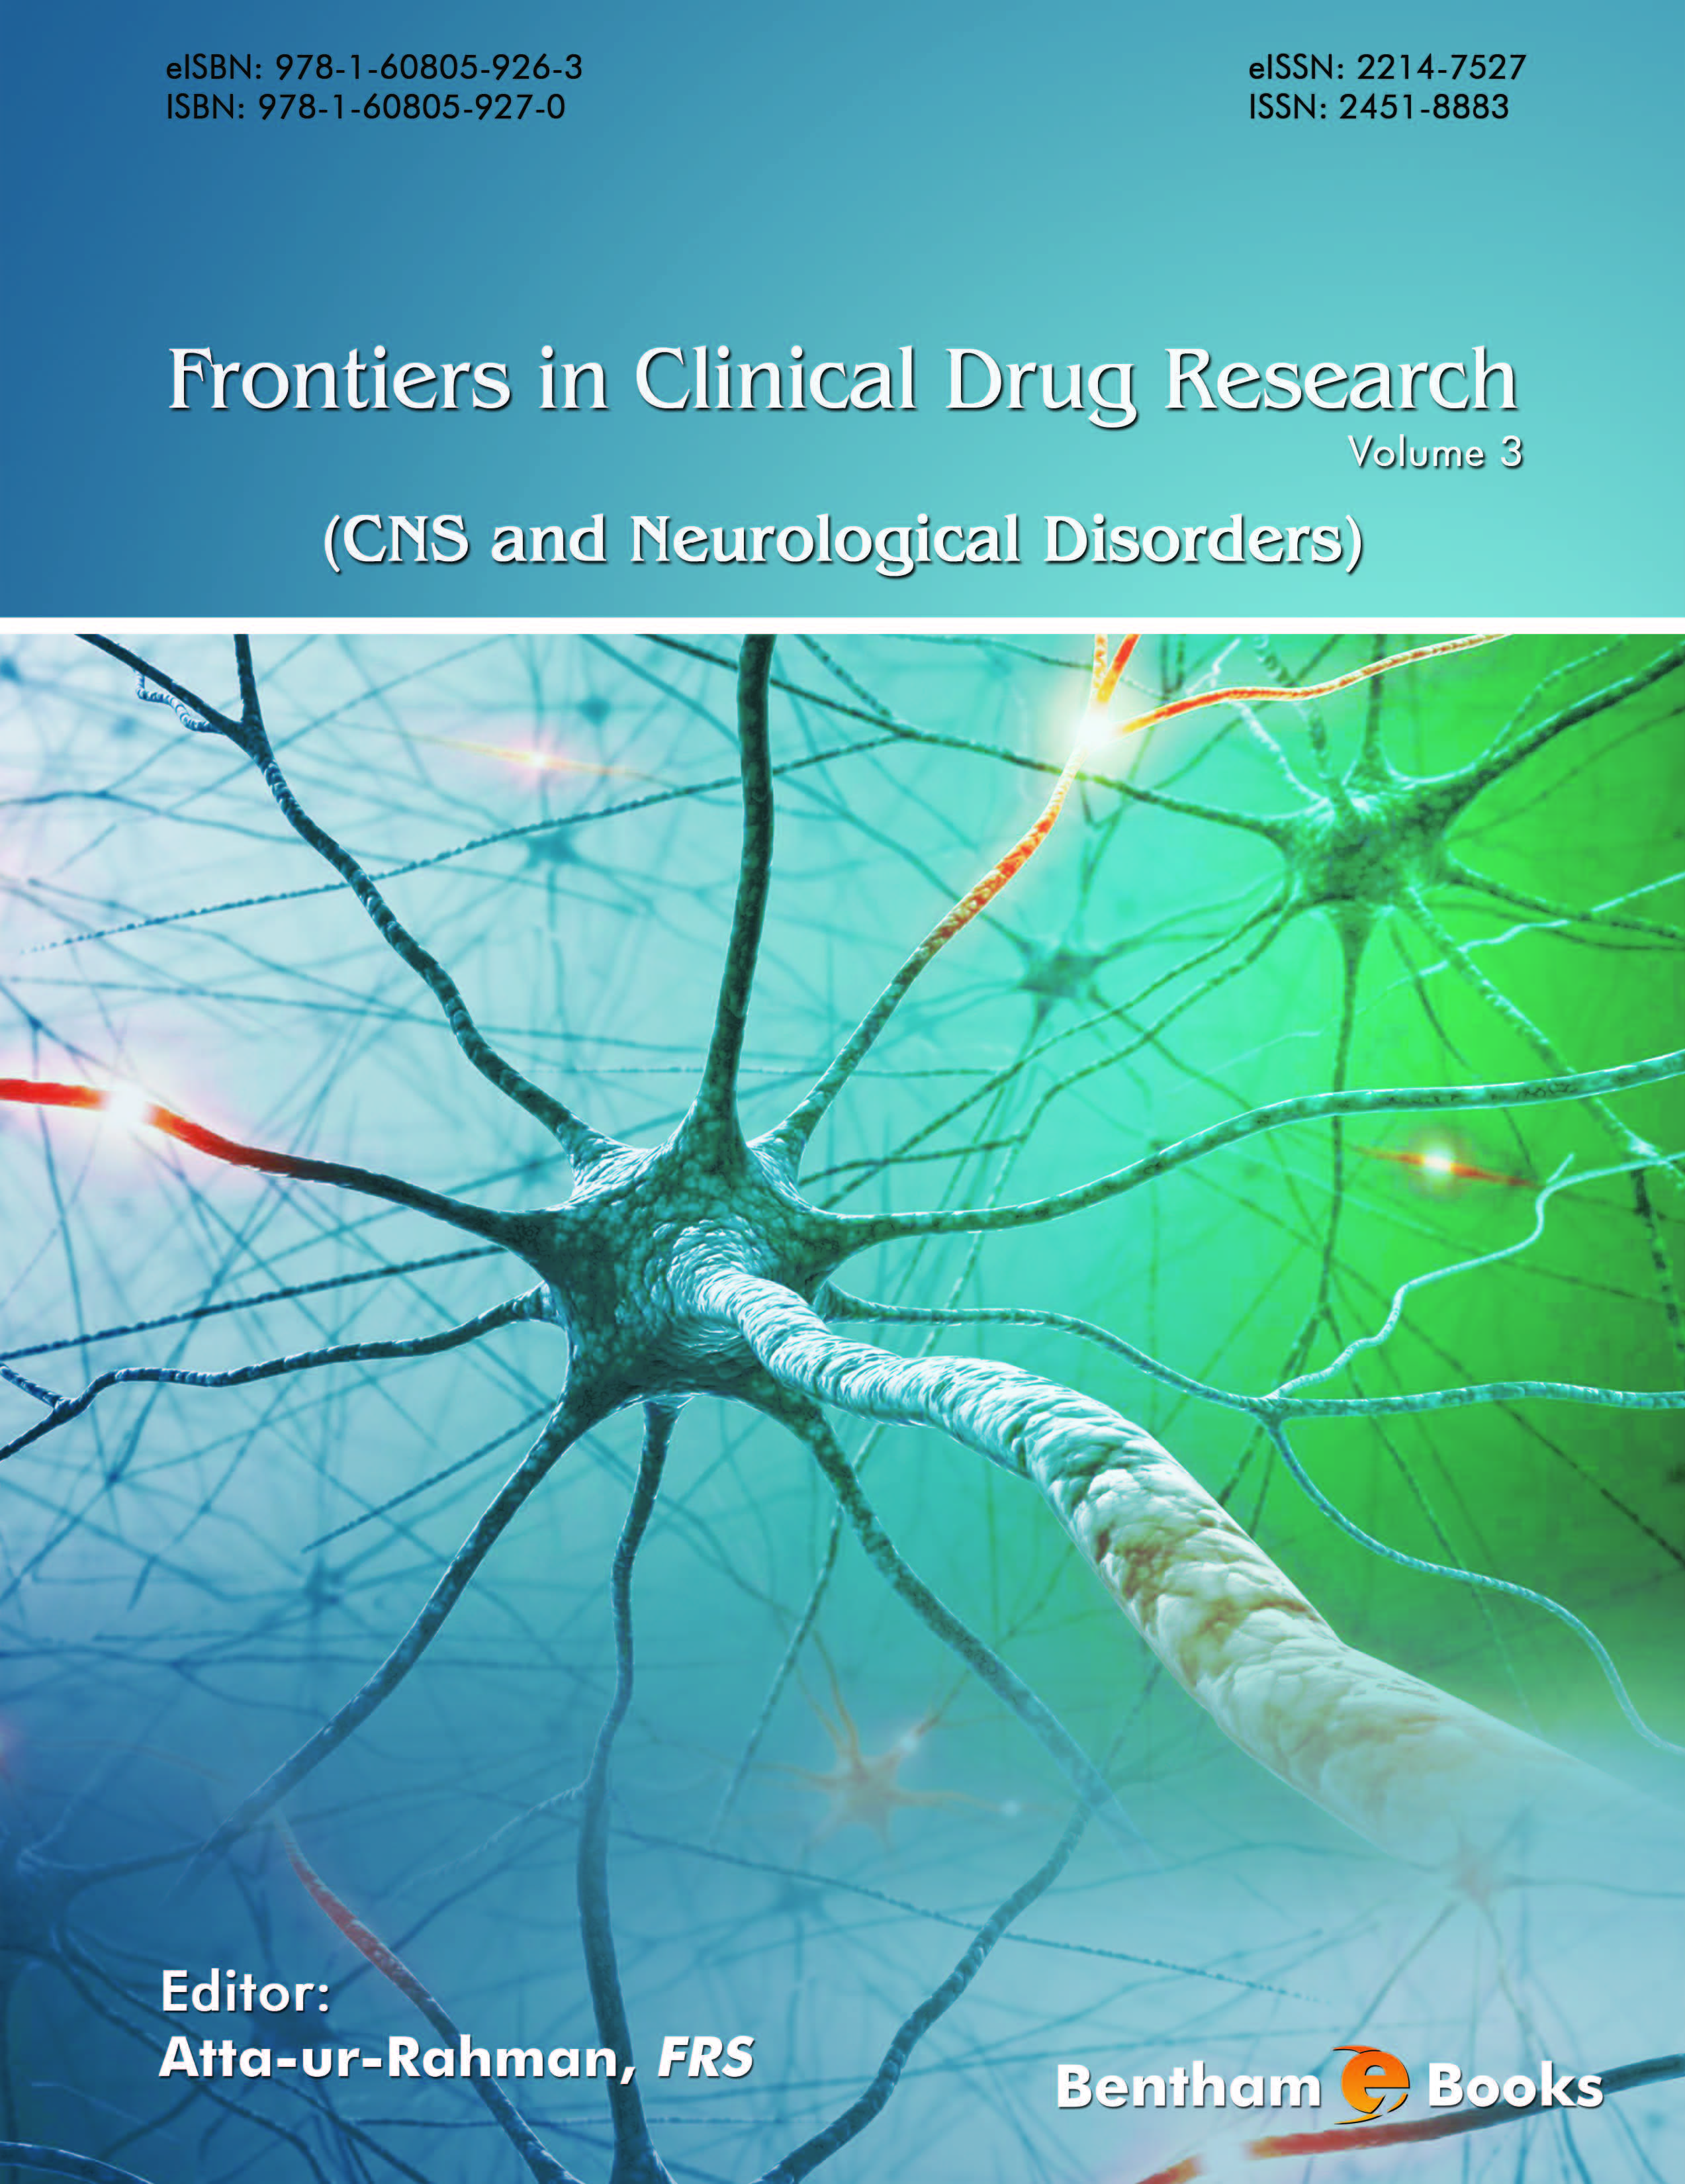 Frontiers in Clinical Drug Research -CNS and Neurological Disorders